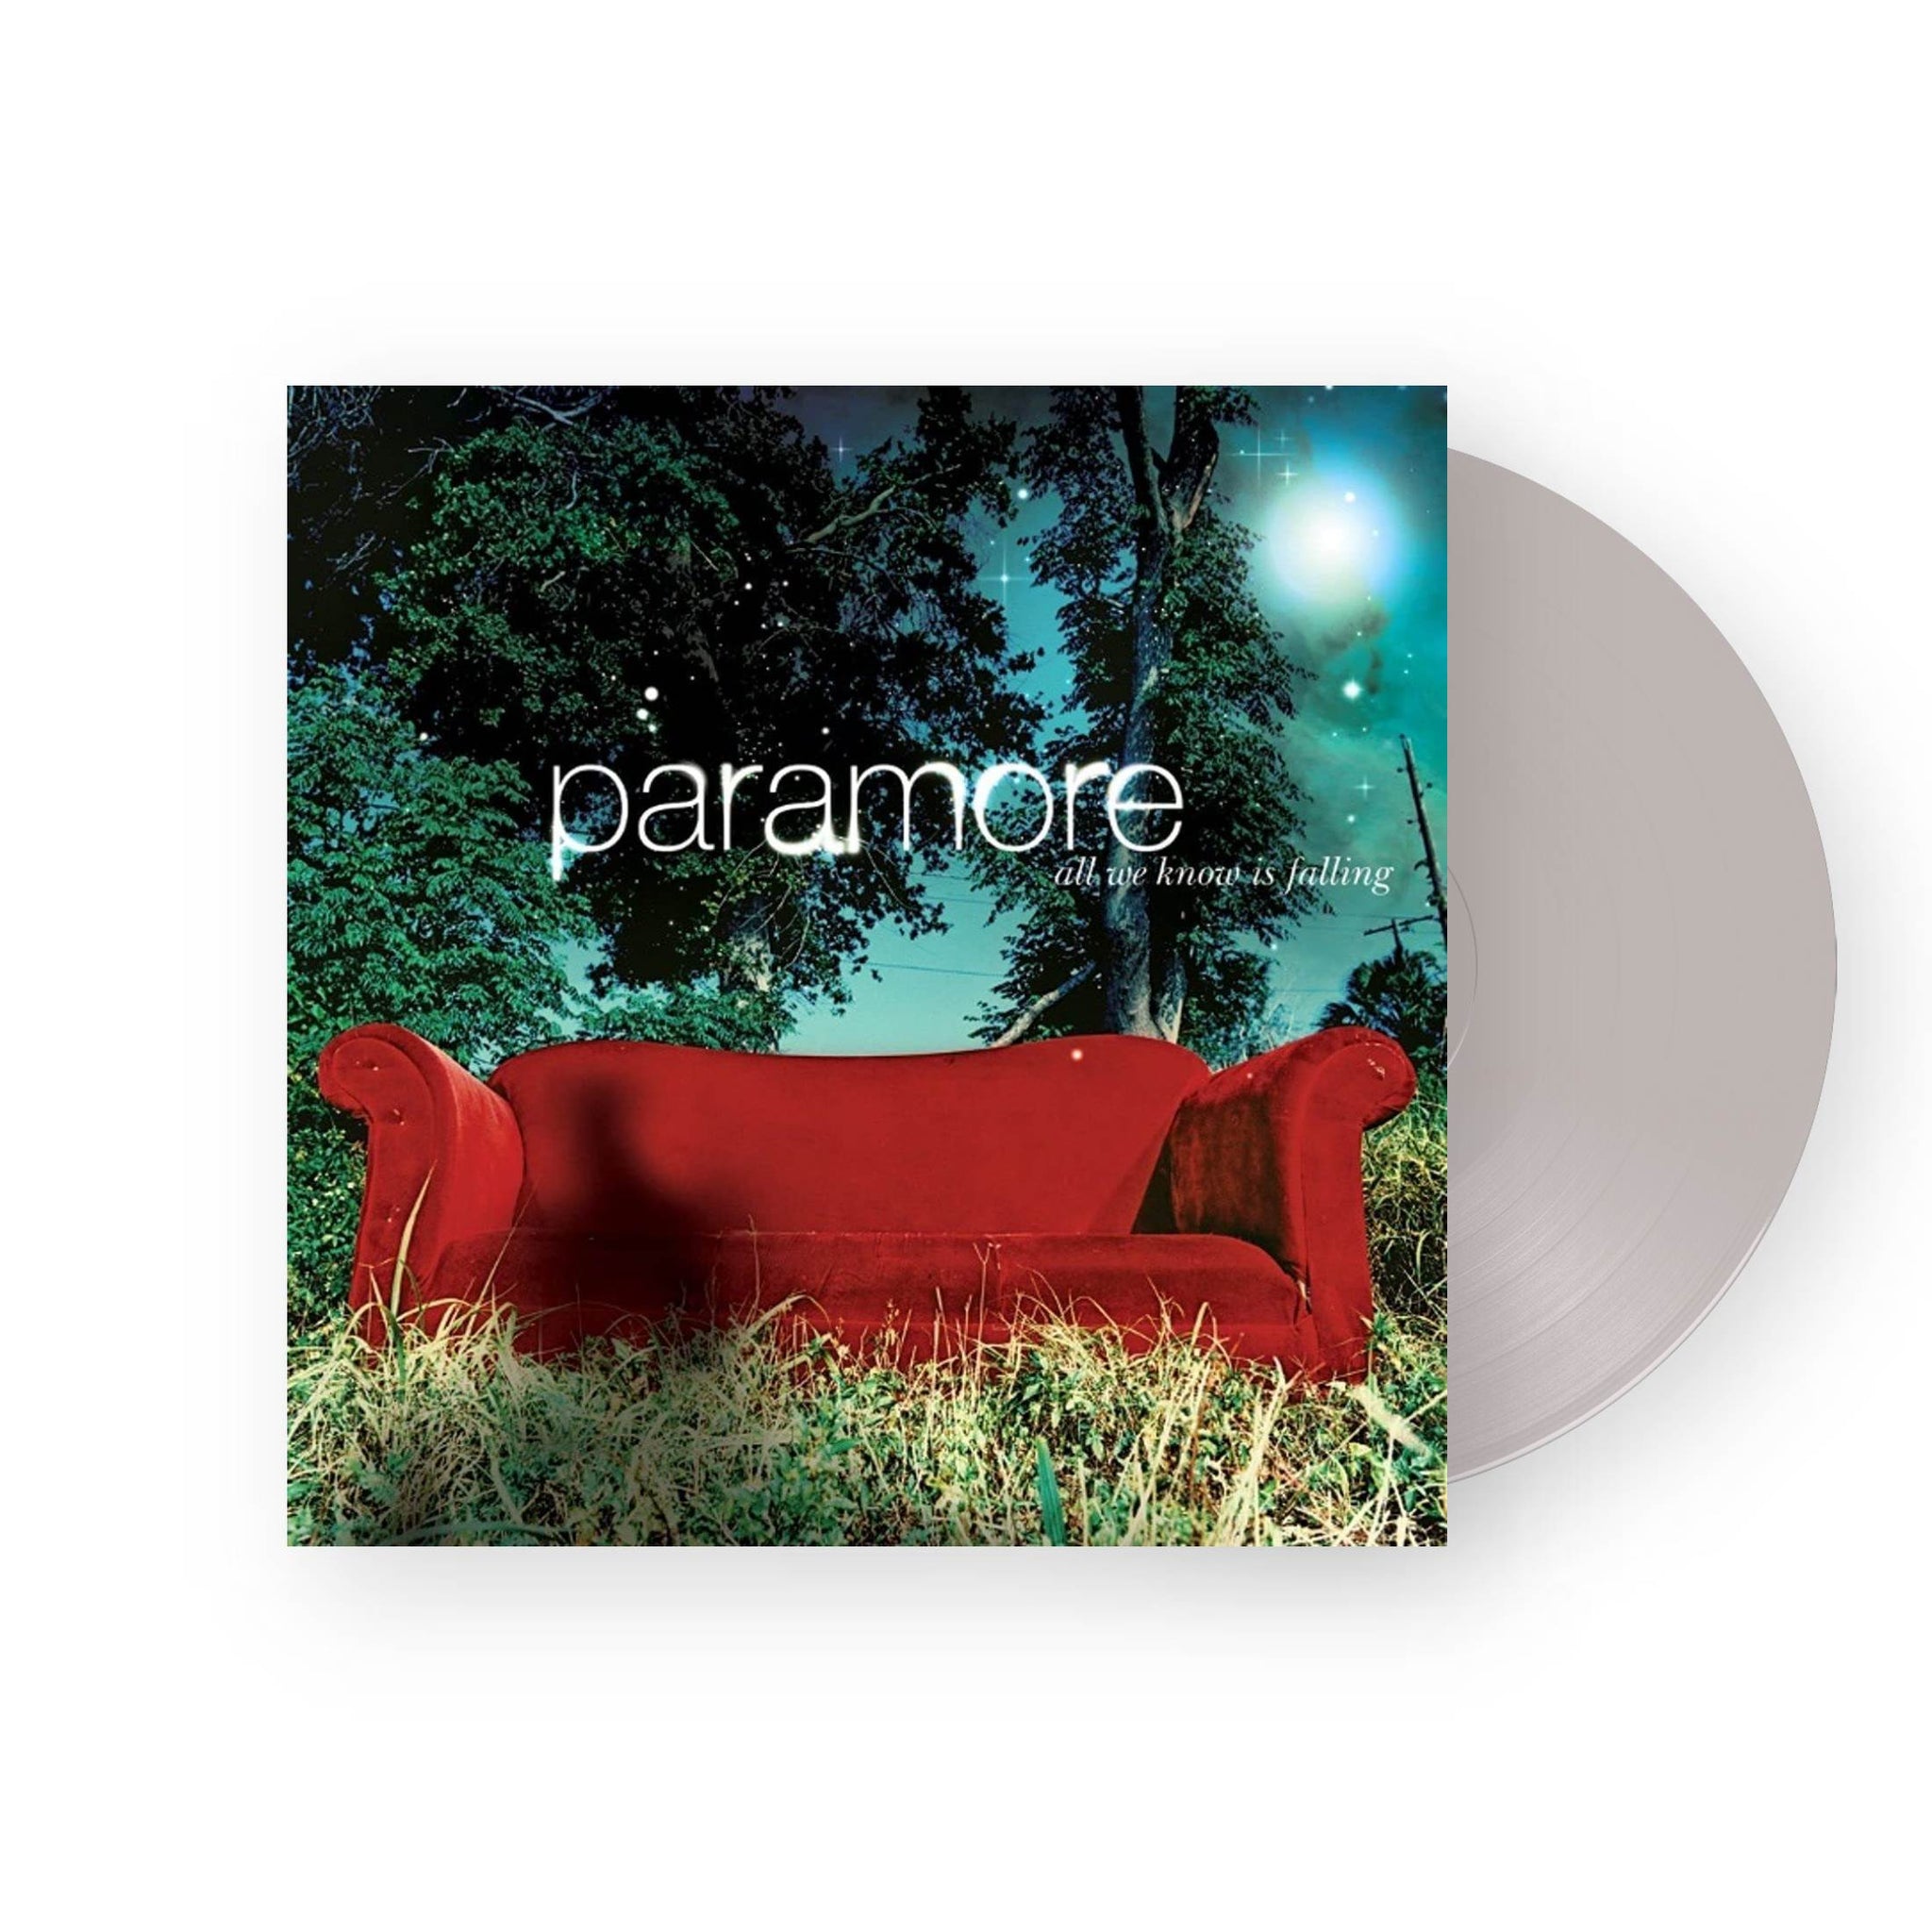 Paramore - All We Know Is Falling LP (Silver Vinyl)